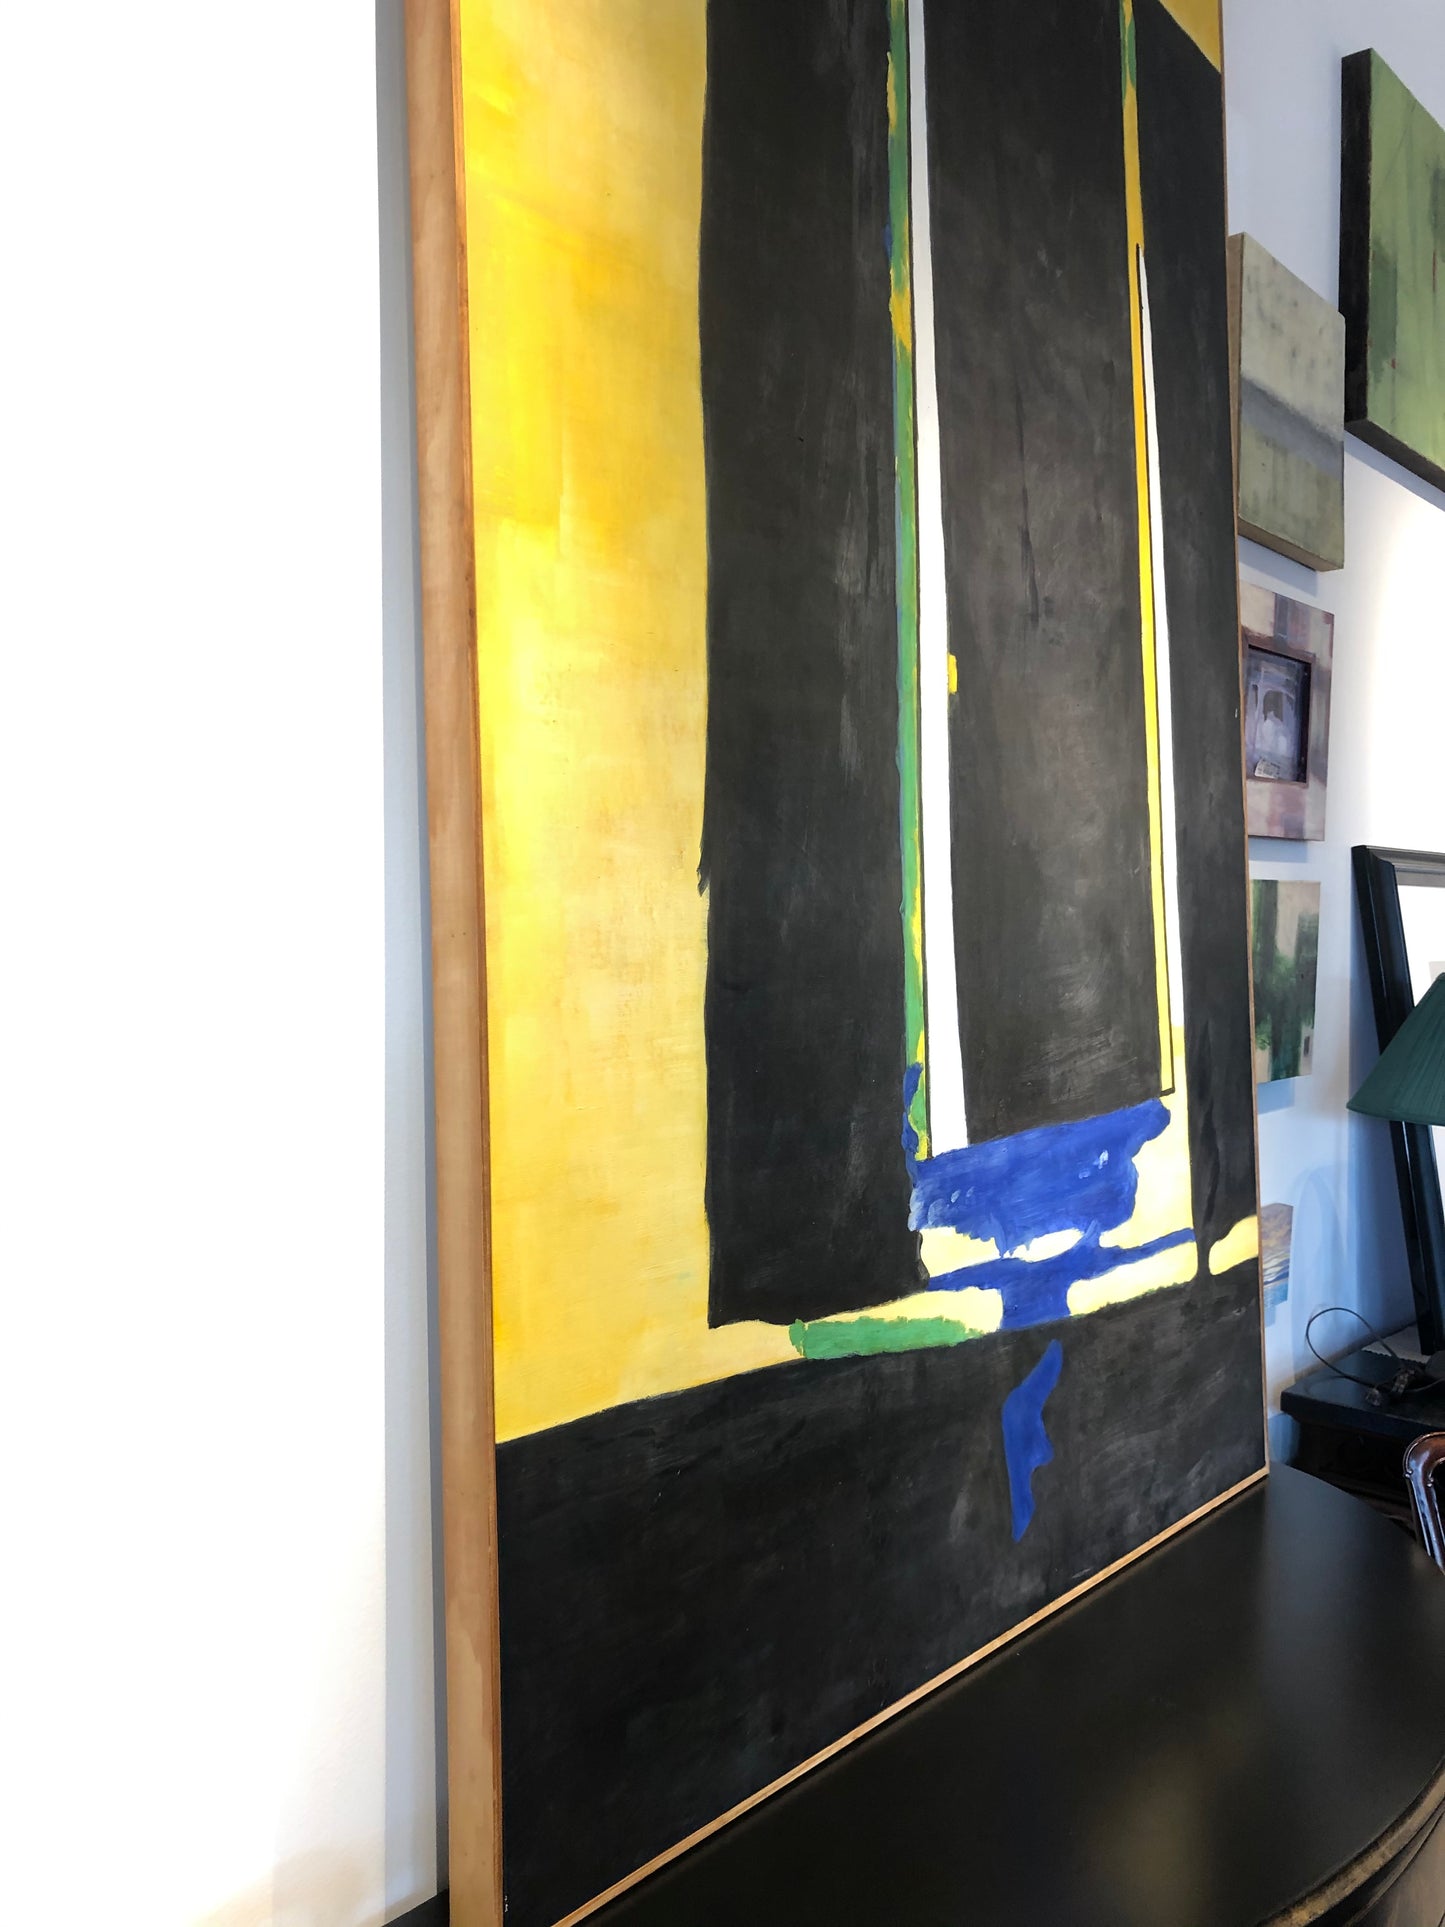 Reproduction of a Work by Robert Motherwell Oil on Canvas